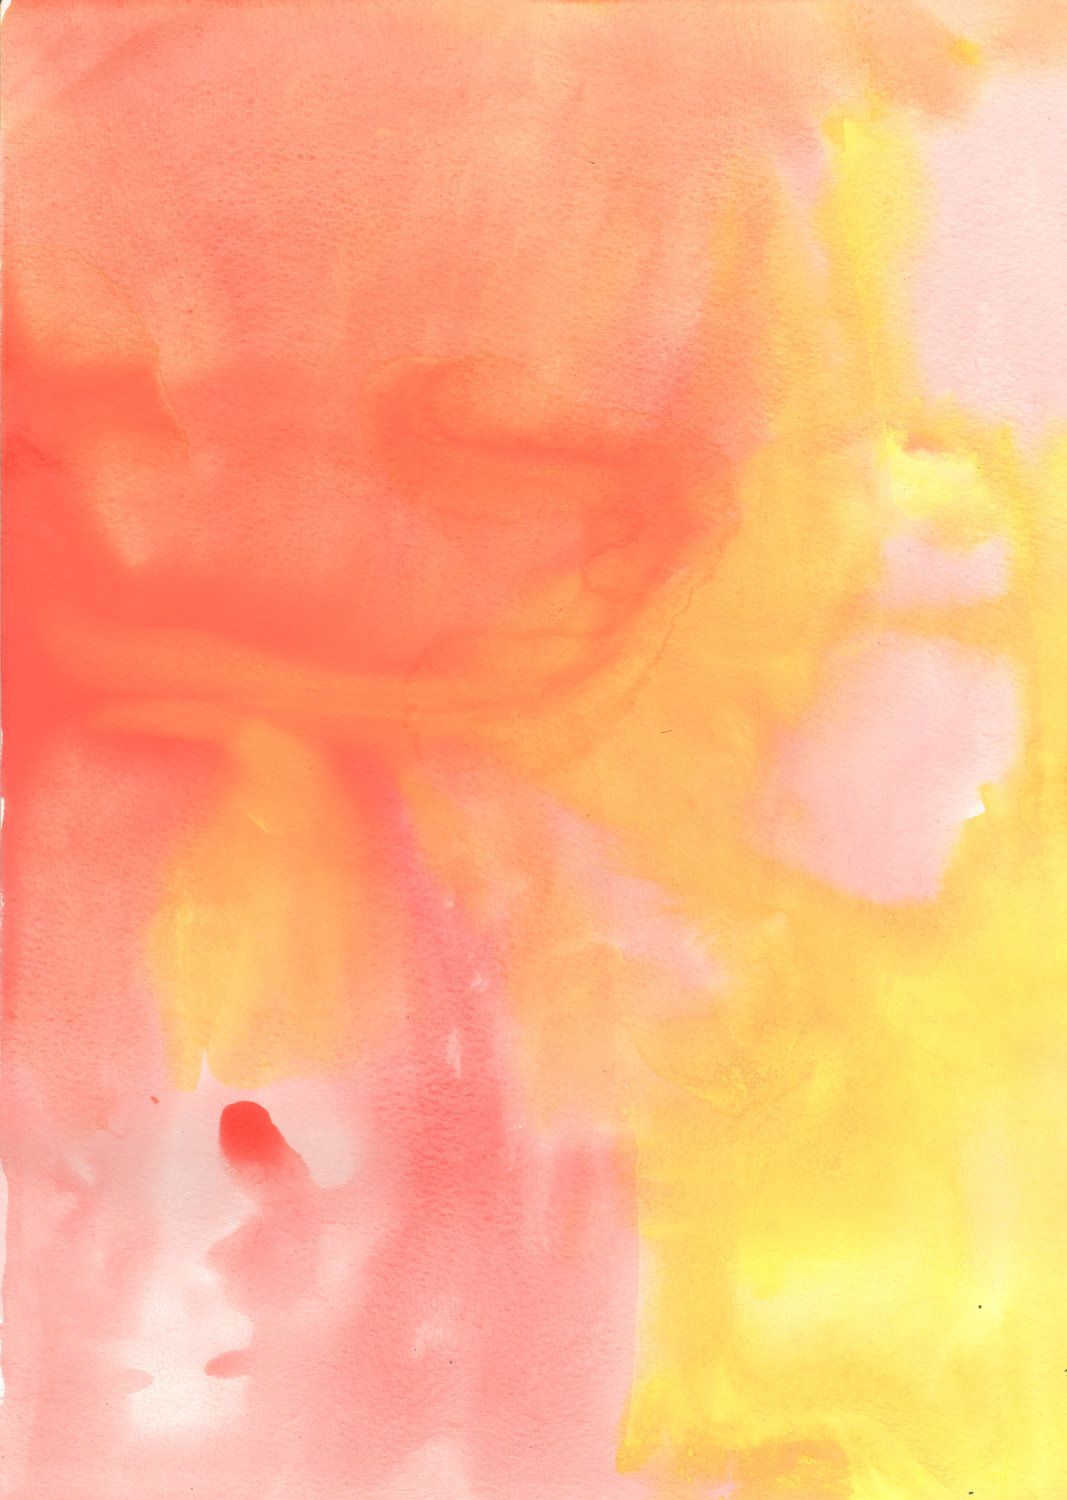 Items similar to Red, Yellow Abstract Watercolor on Etsy. Abstract watercolor, Pink watercolor, Watercolor wallpaper